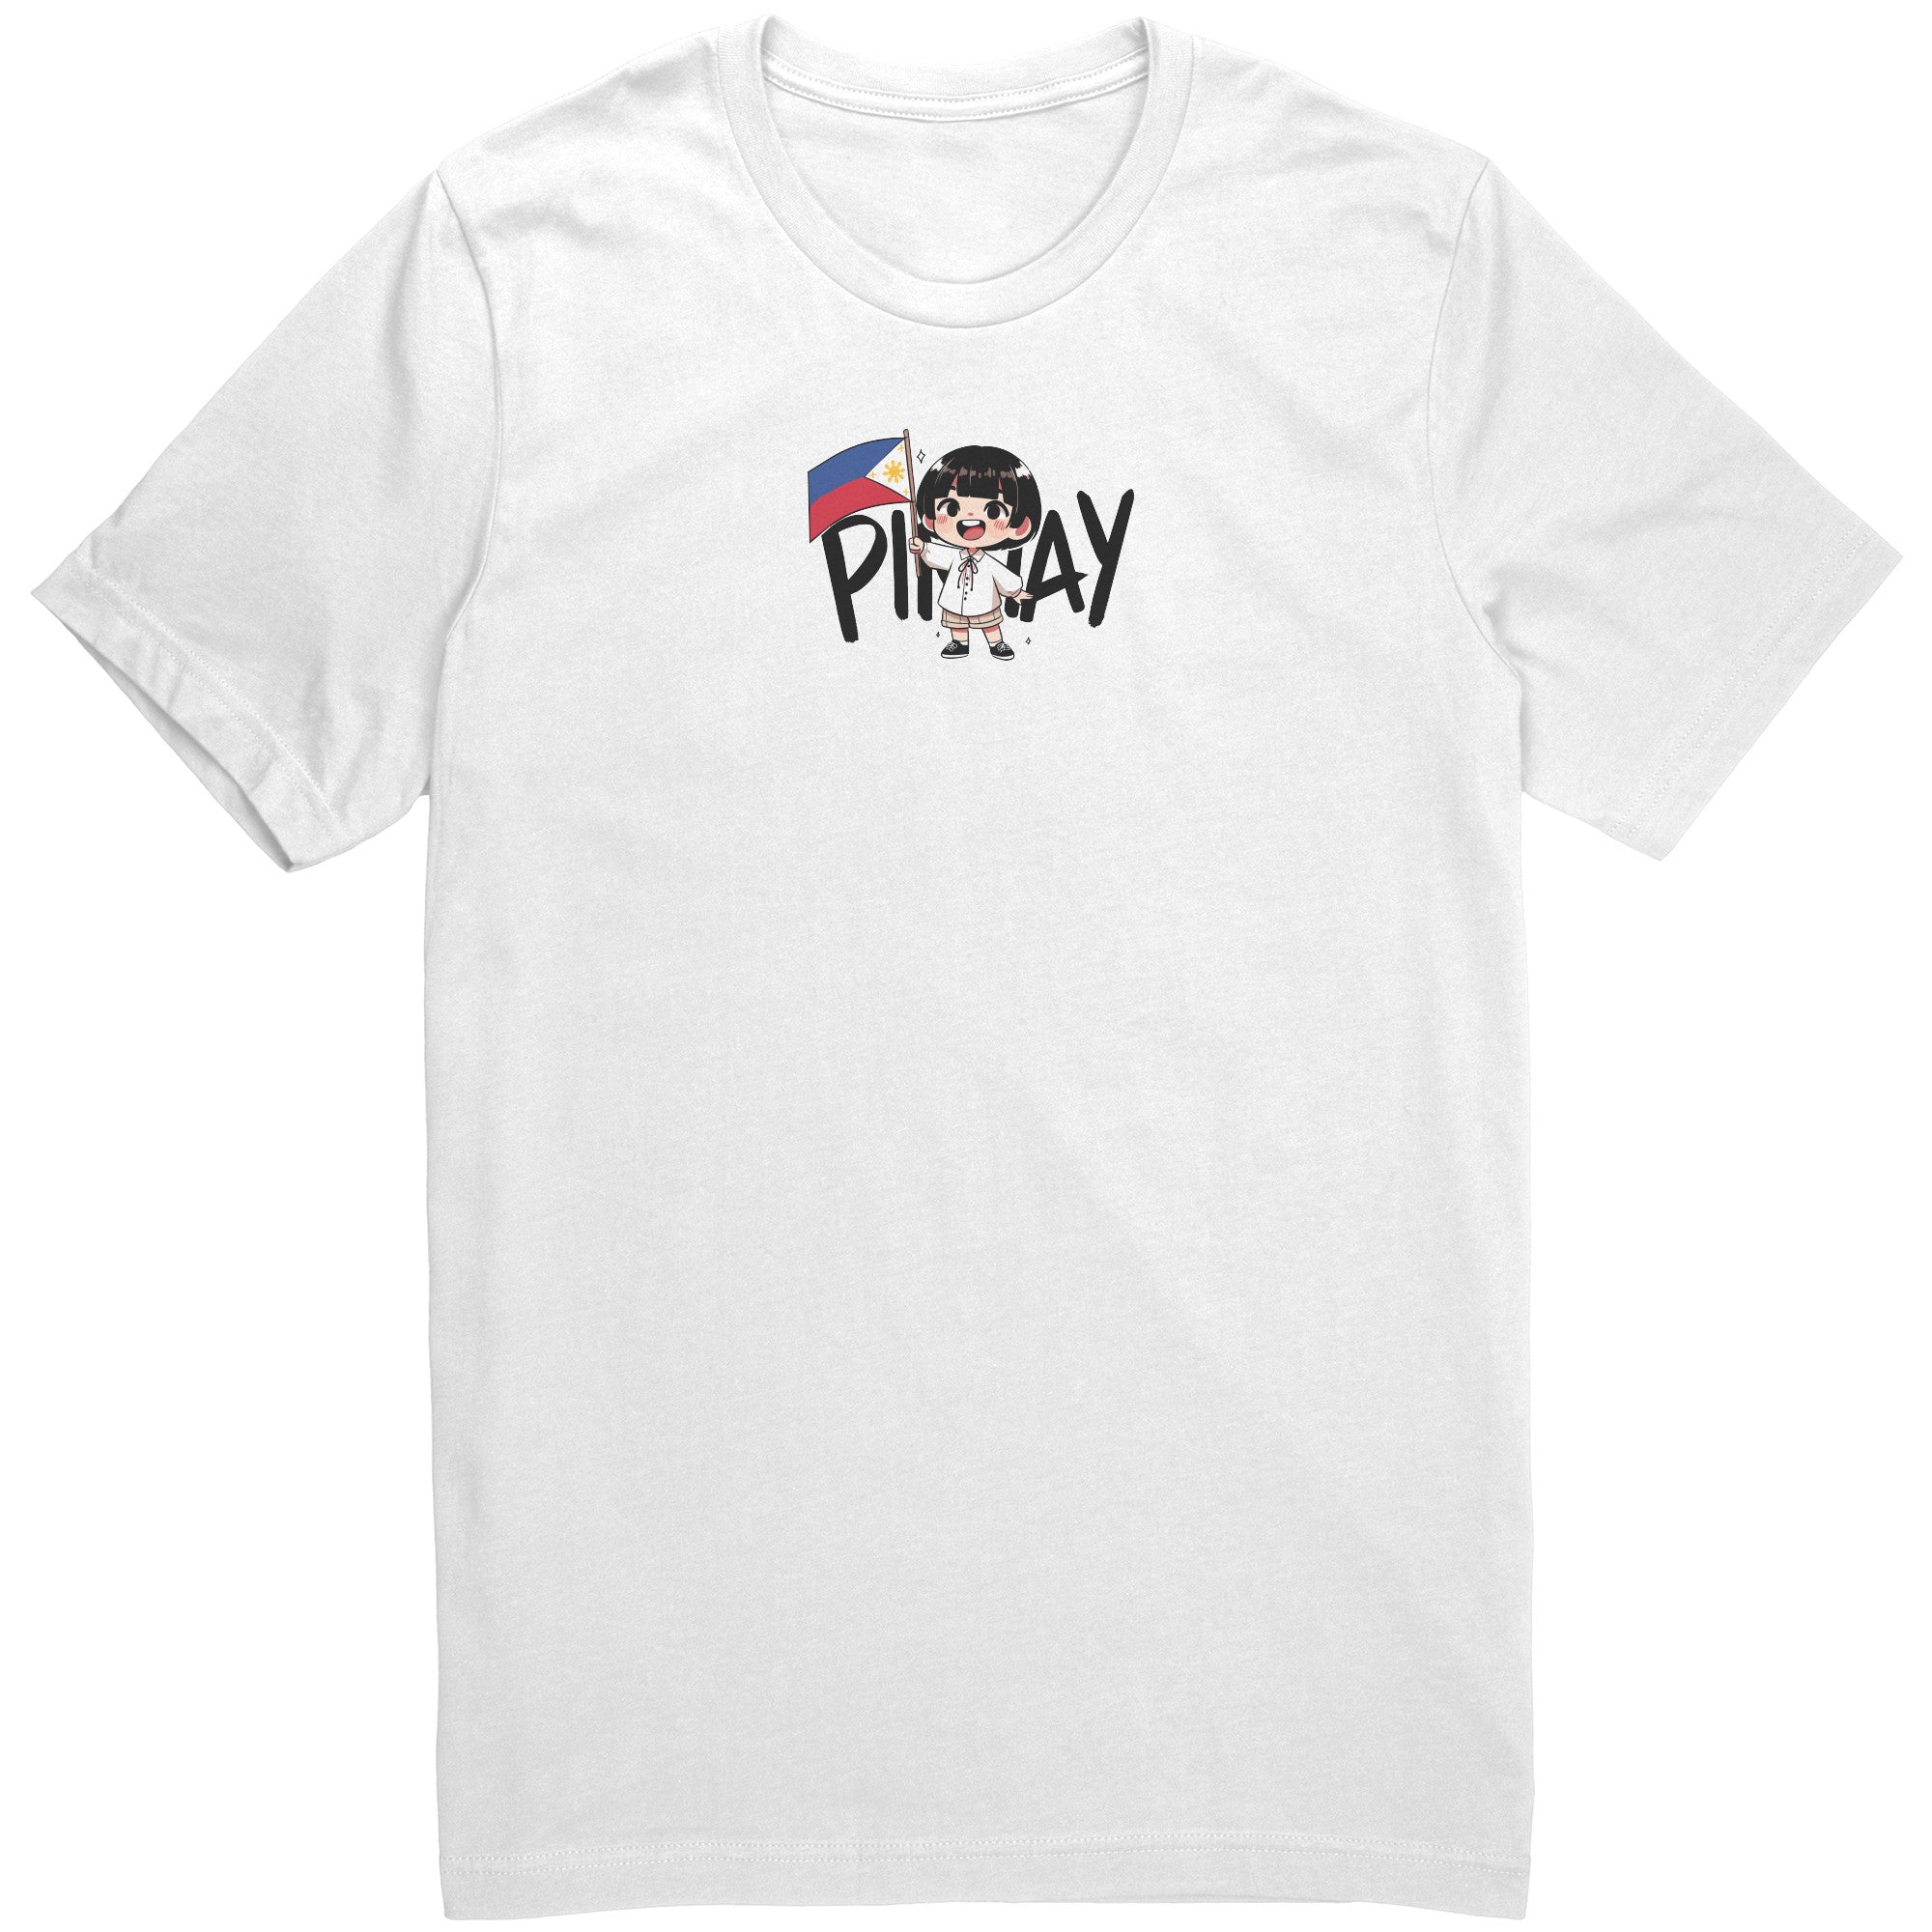 "Cute Cartoon Filipino Pride T-shirt - Vibrant Pinoy Pride Tee - Perfect Gift for Filipinos - Colorful Philippines Heritage Tee" - B